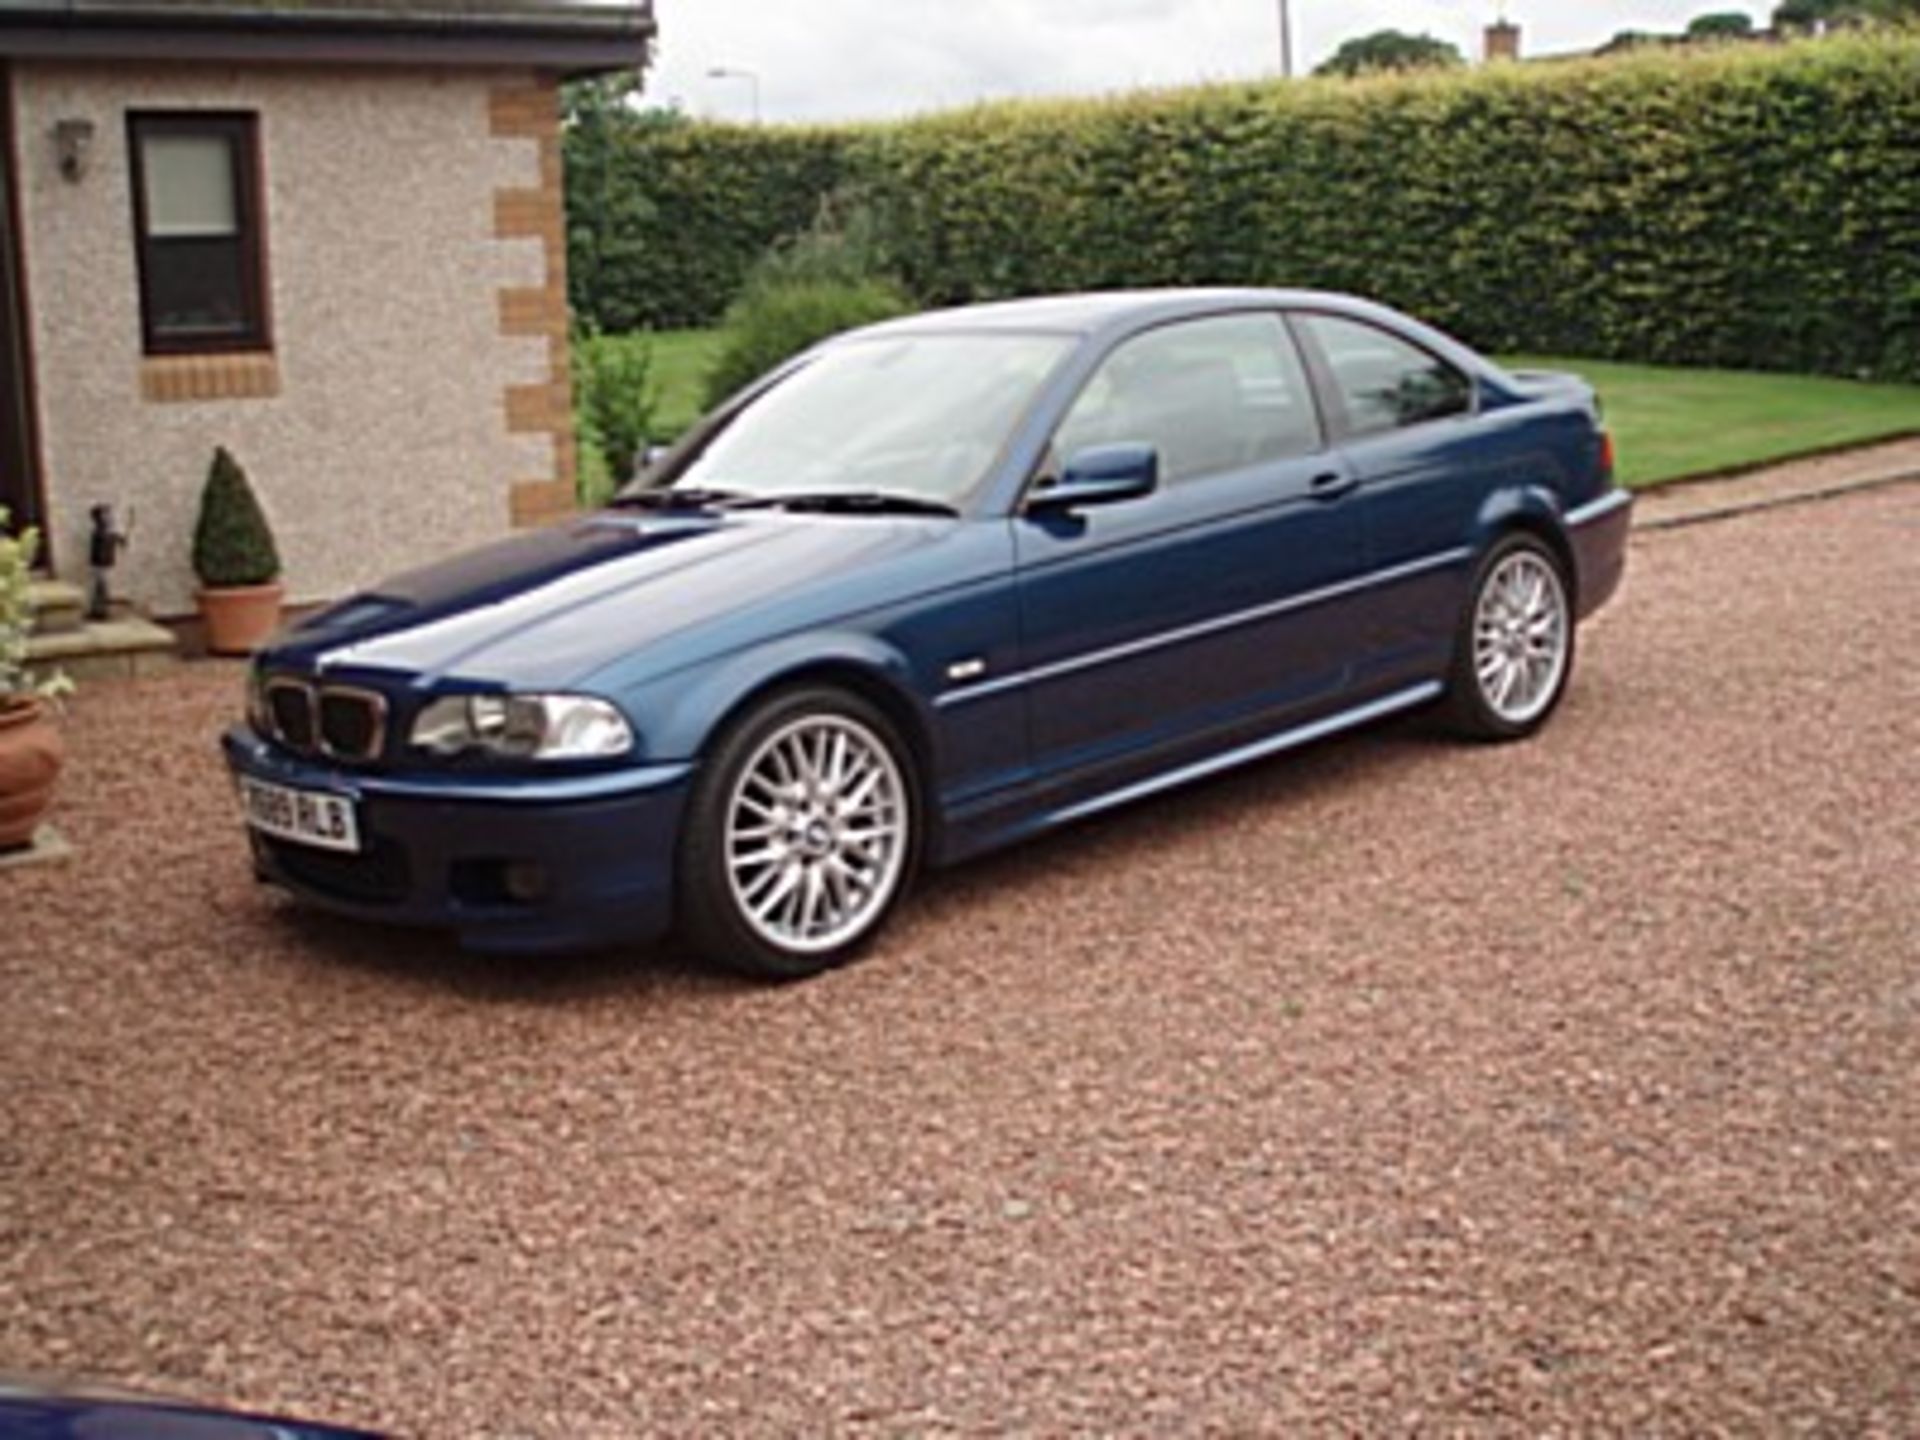 BMW, 330 CI SPORT - 2979cc, Chassis number WBABN52010JU61803 - supplied by Holland Park on March